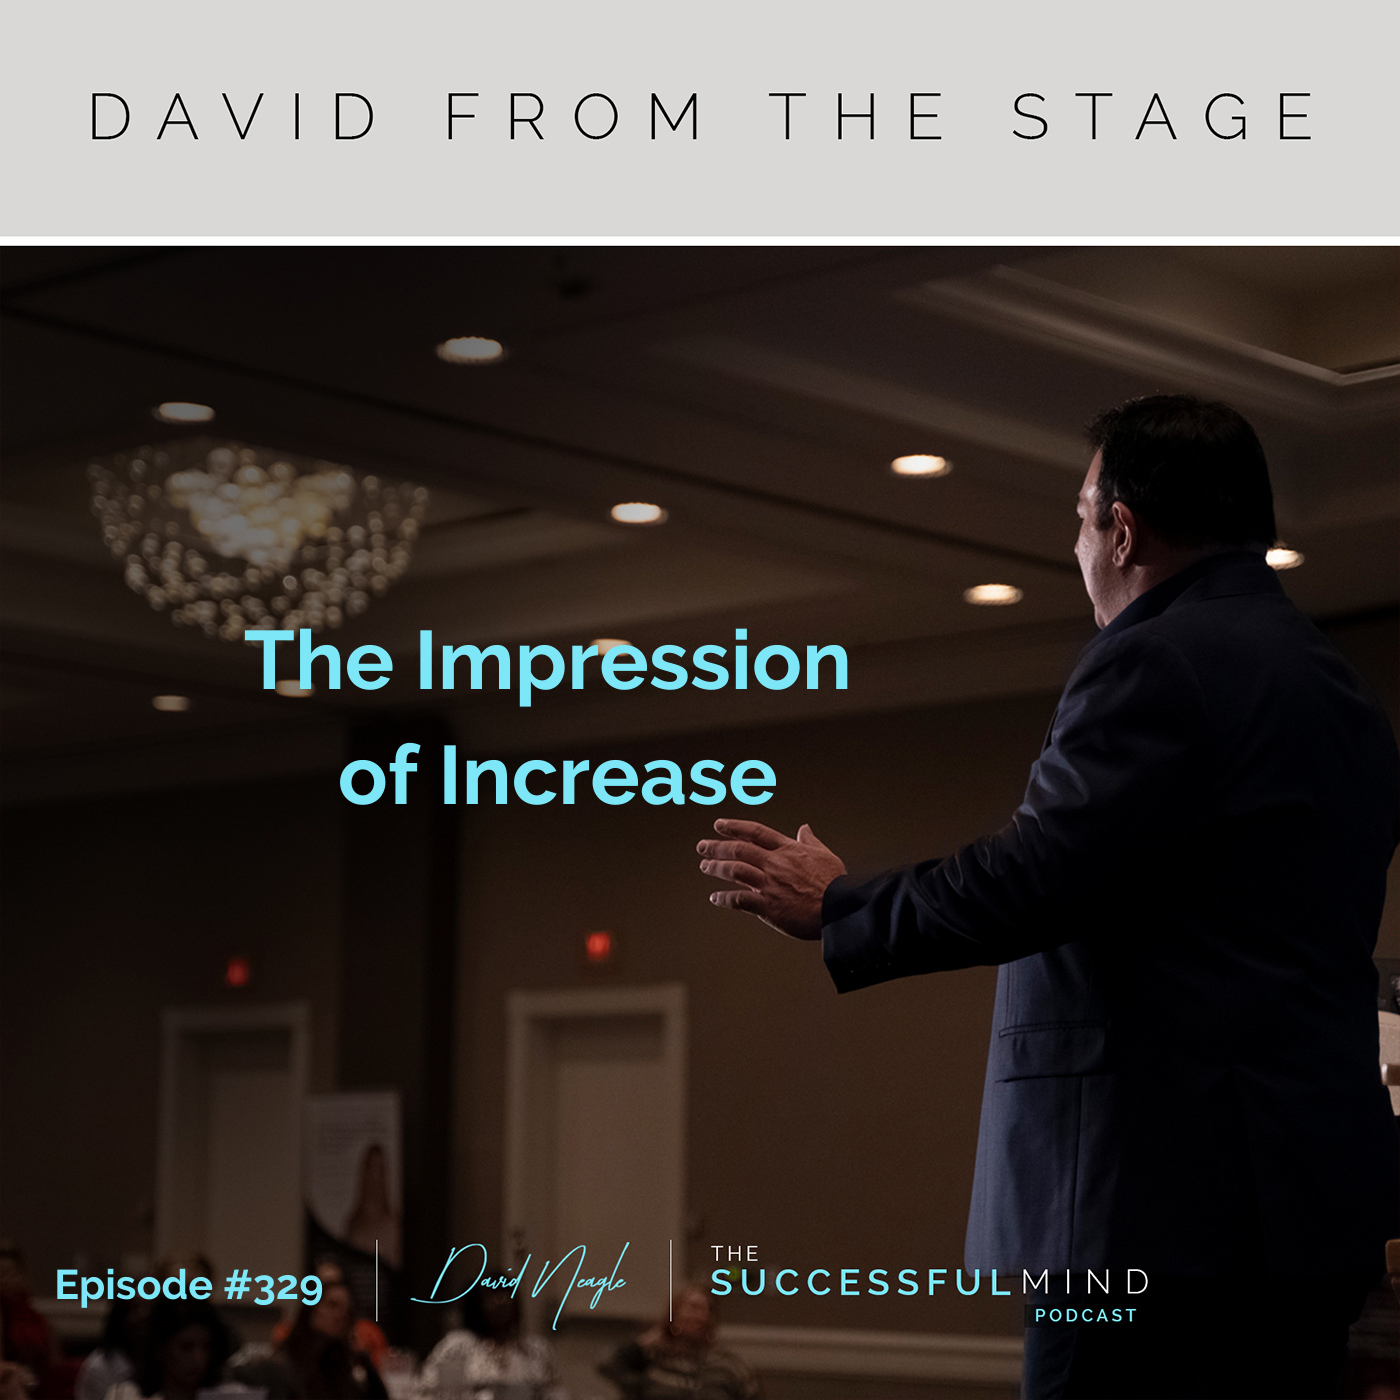 The Successful Mind Podcast Episode 329 - The Impression of Increase